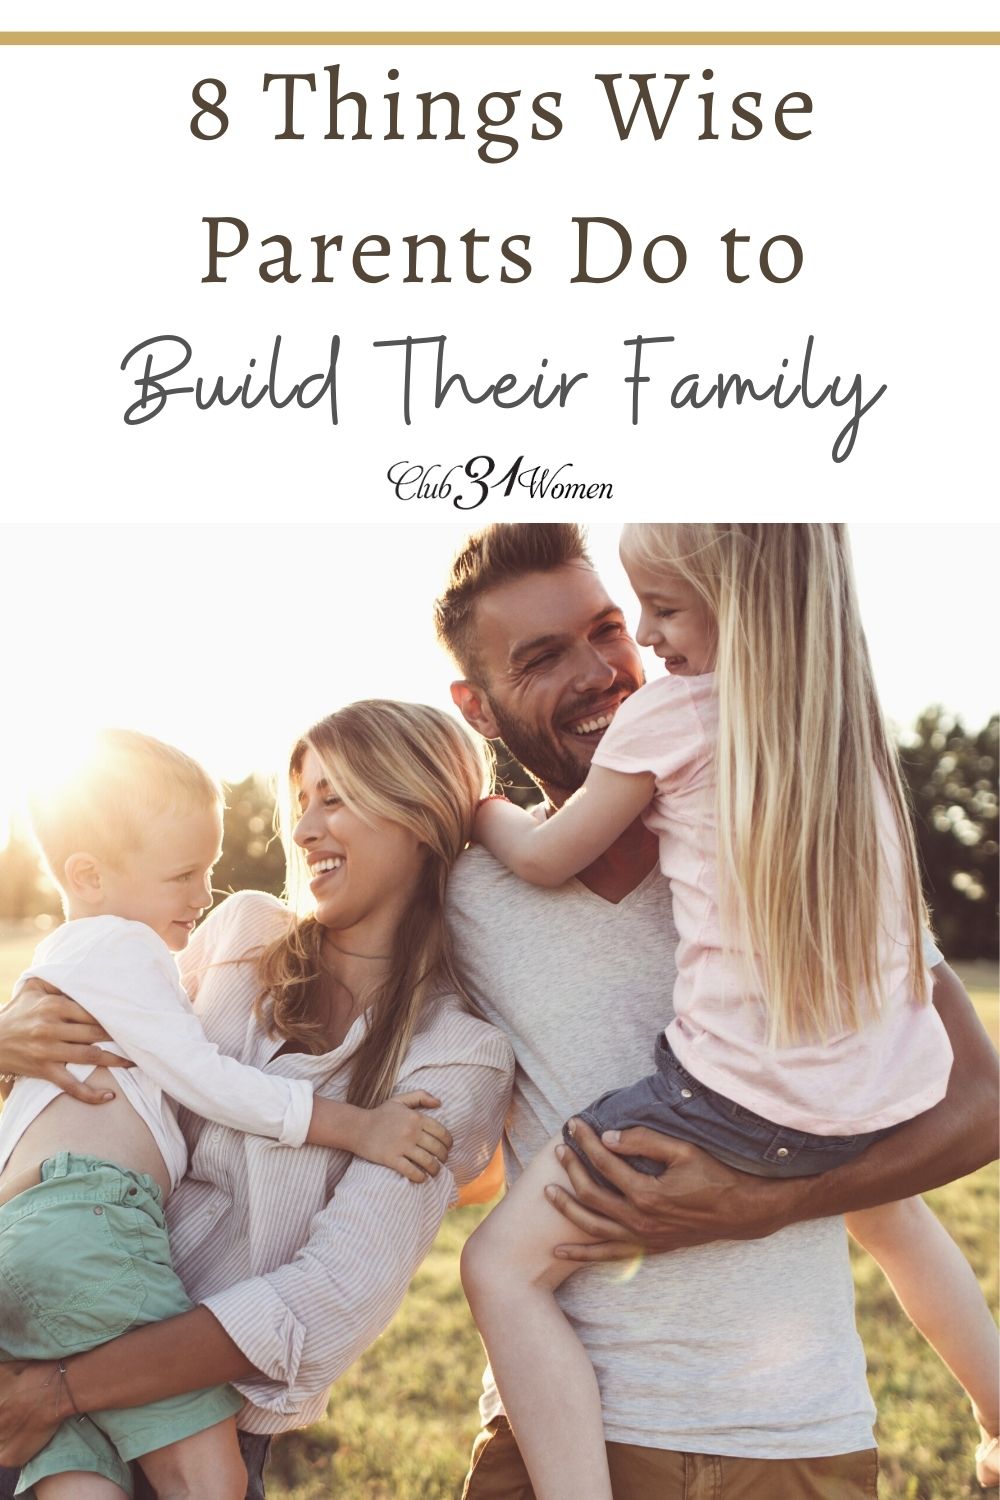 It takes wise parents to raise well-adjusted children and build a family. Here are some things parents can do to work toward that goal. via @Club31Women